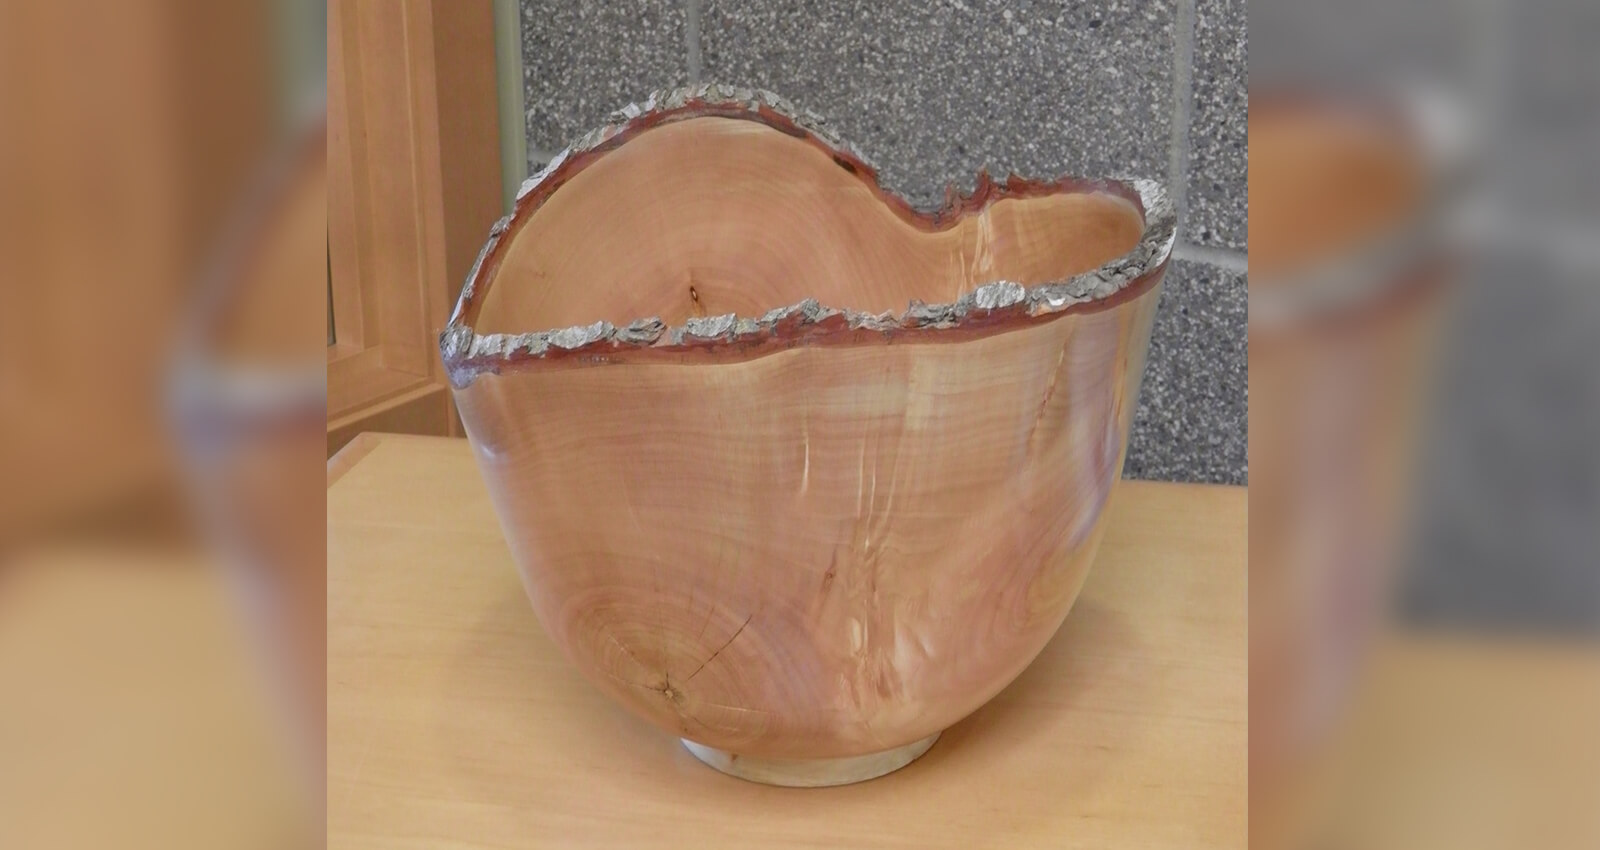 Decorative Wooden Bowl artwork on display in Port Offices.